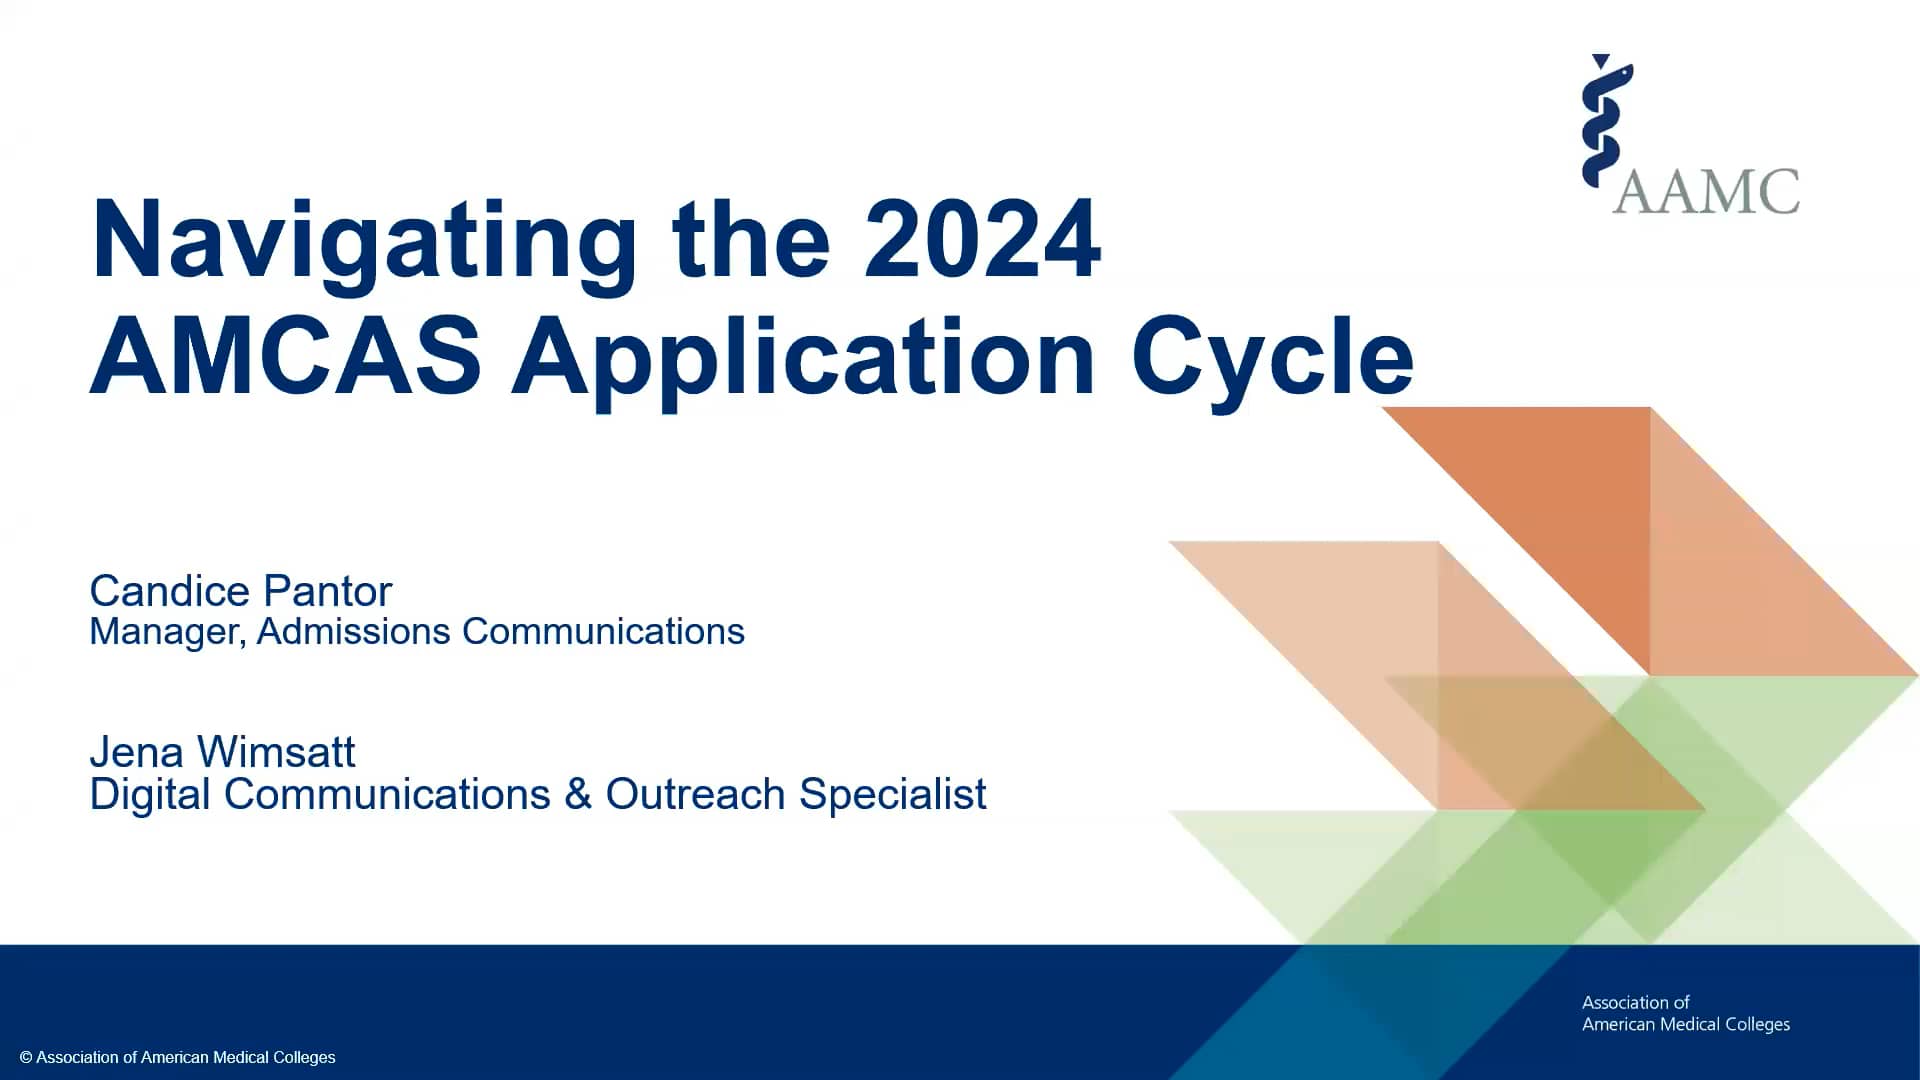 Navigating the 2024 AMCAS Application Cycle for Applicants on Vimeo